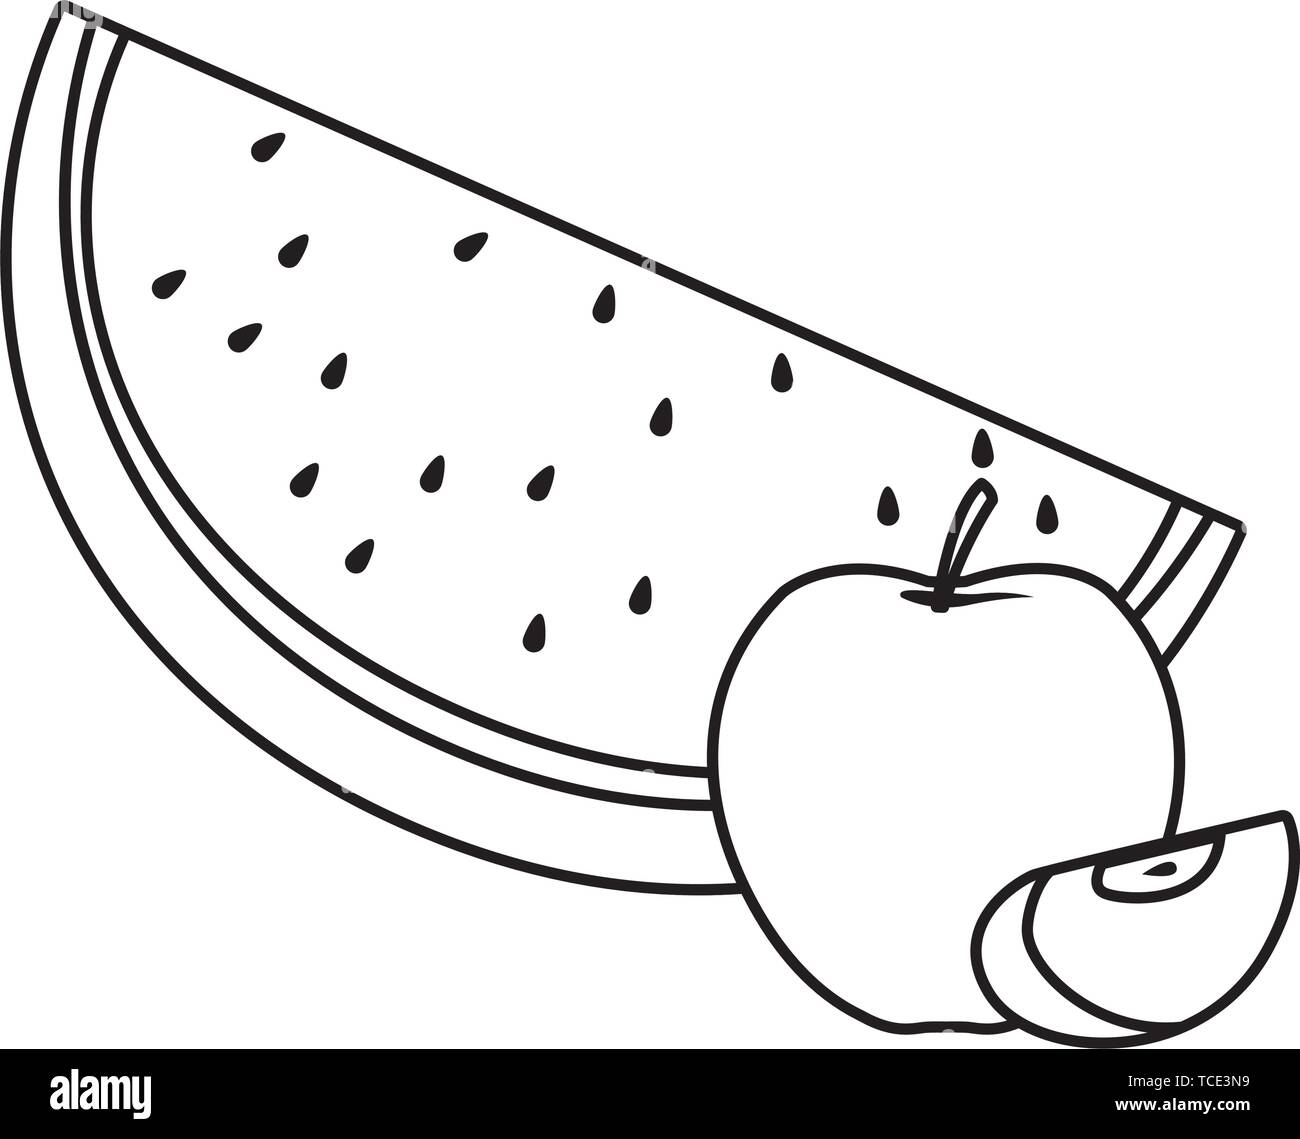 Watermelon and apples sliced cartoon in black and white Stock Vector